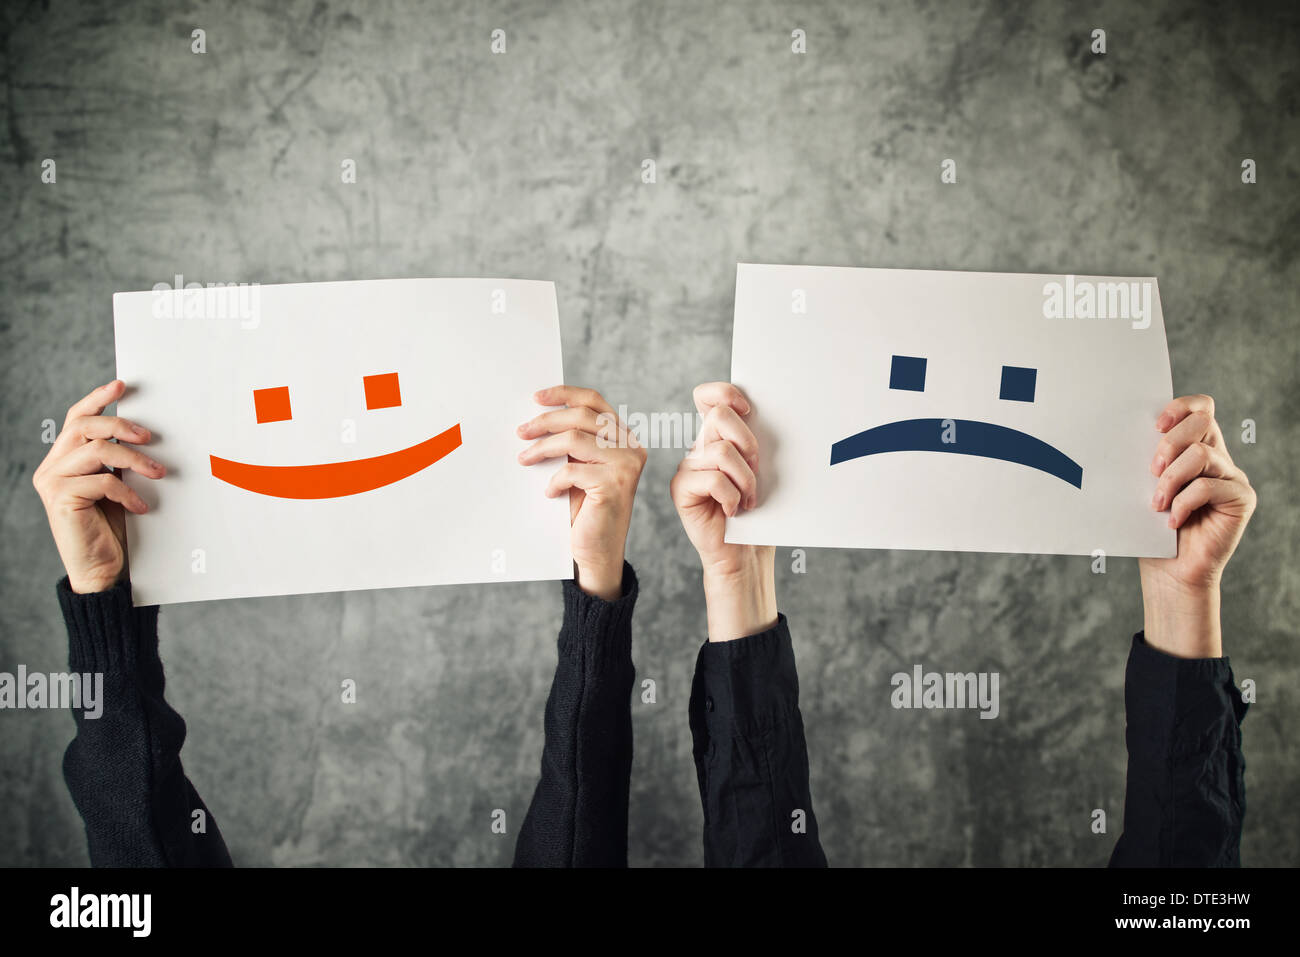 Happy and sad face. Women holding papers with happy and sad emoticons. Stock Photo